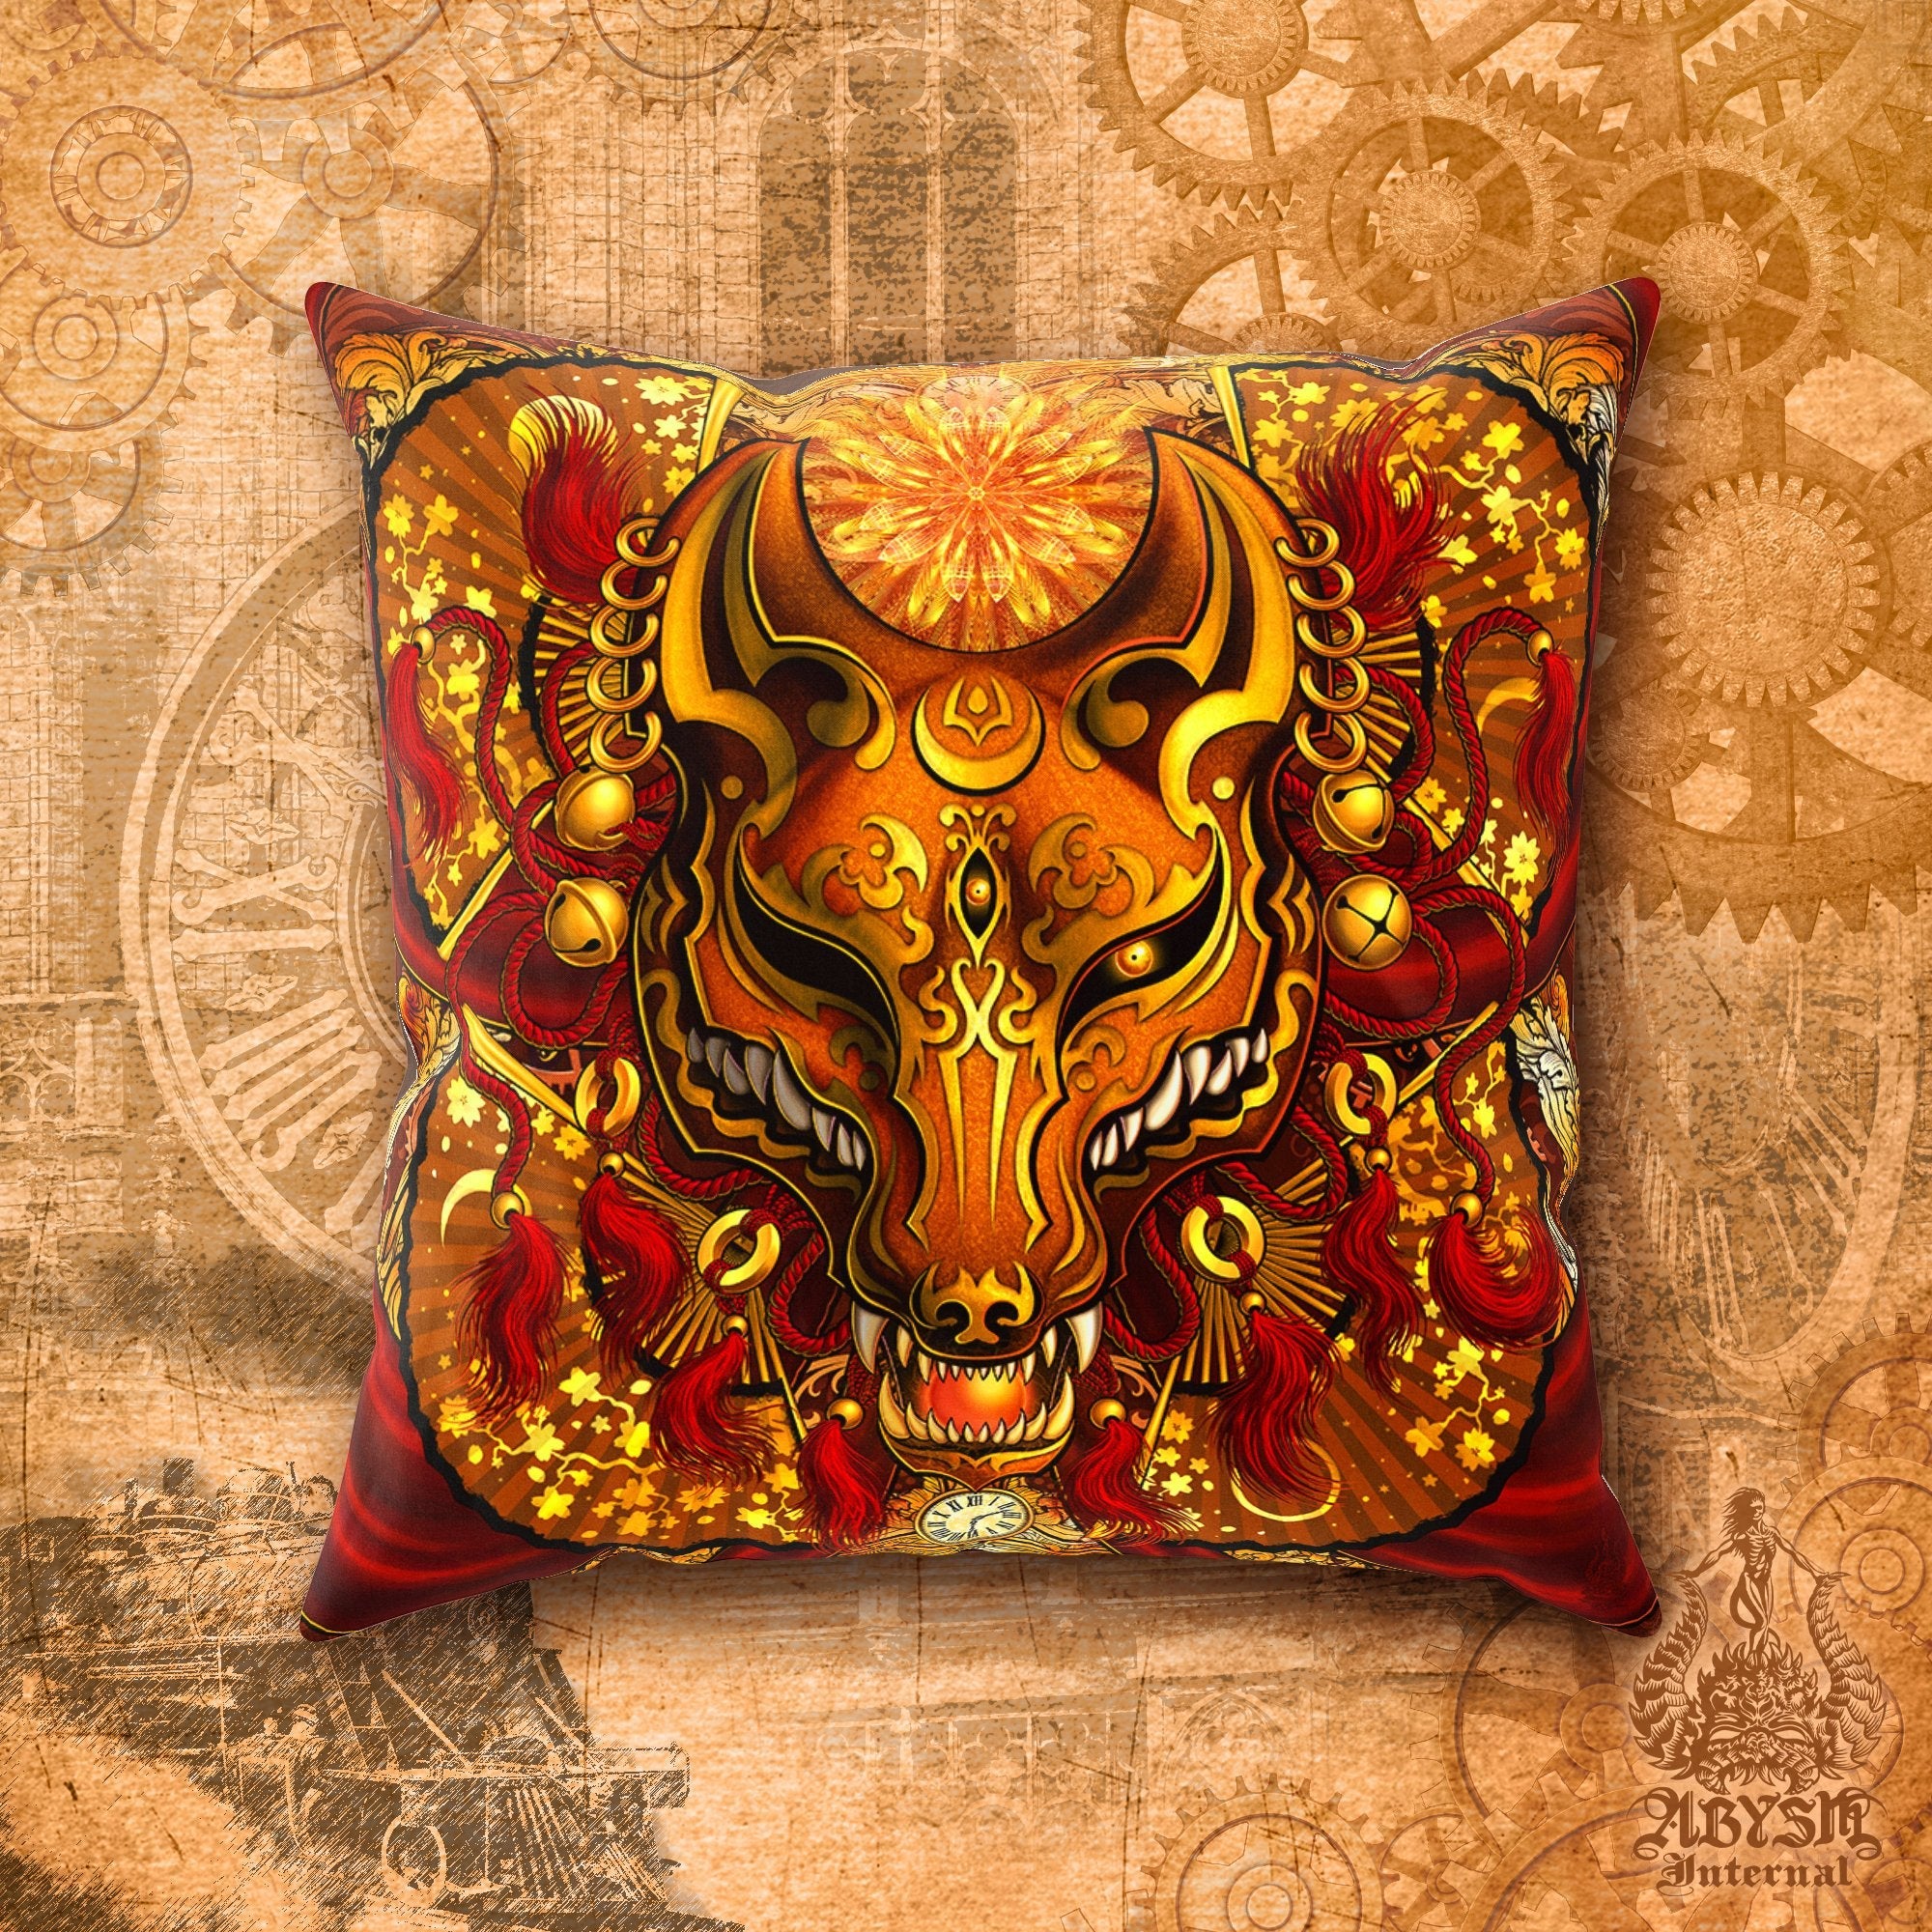 Kitsune Throw Pillow, Decorative Accent Cushion, Japanese Fox Mask, Okami, Anime and Gamer Room Decor - Steampunk, Red - Abysm Internal